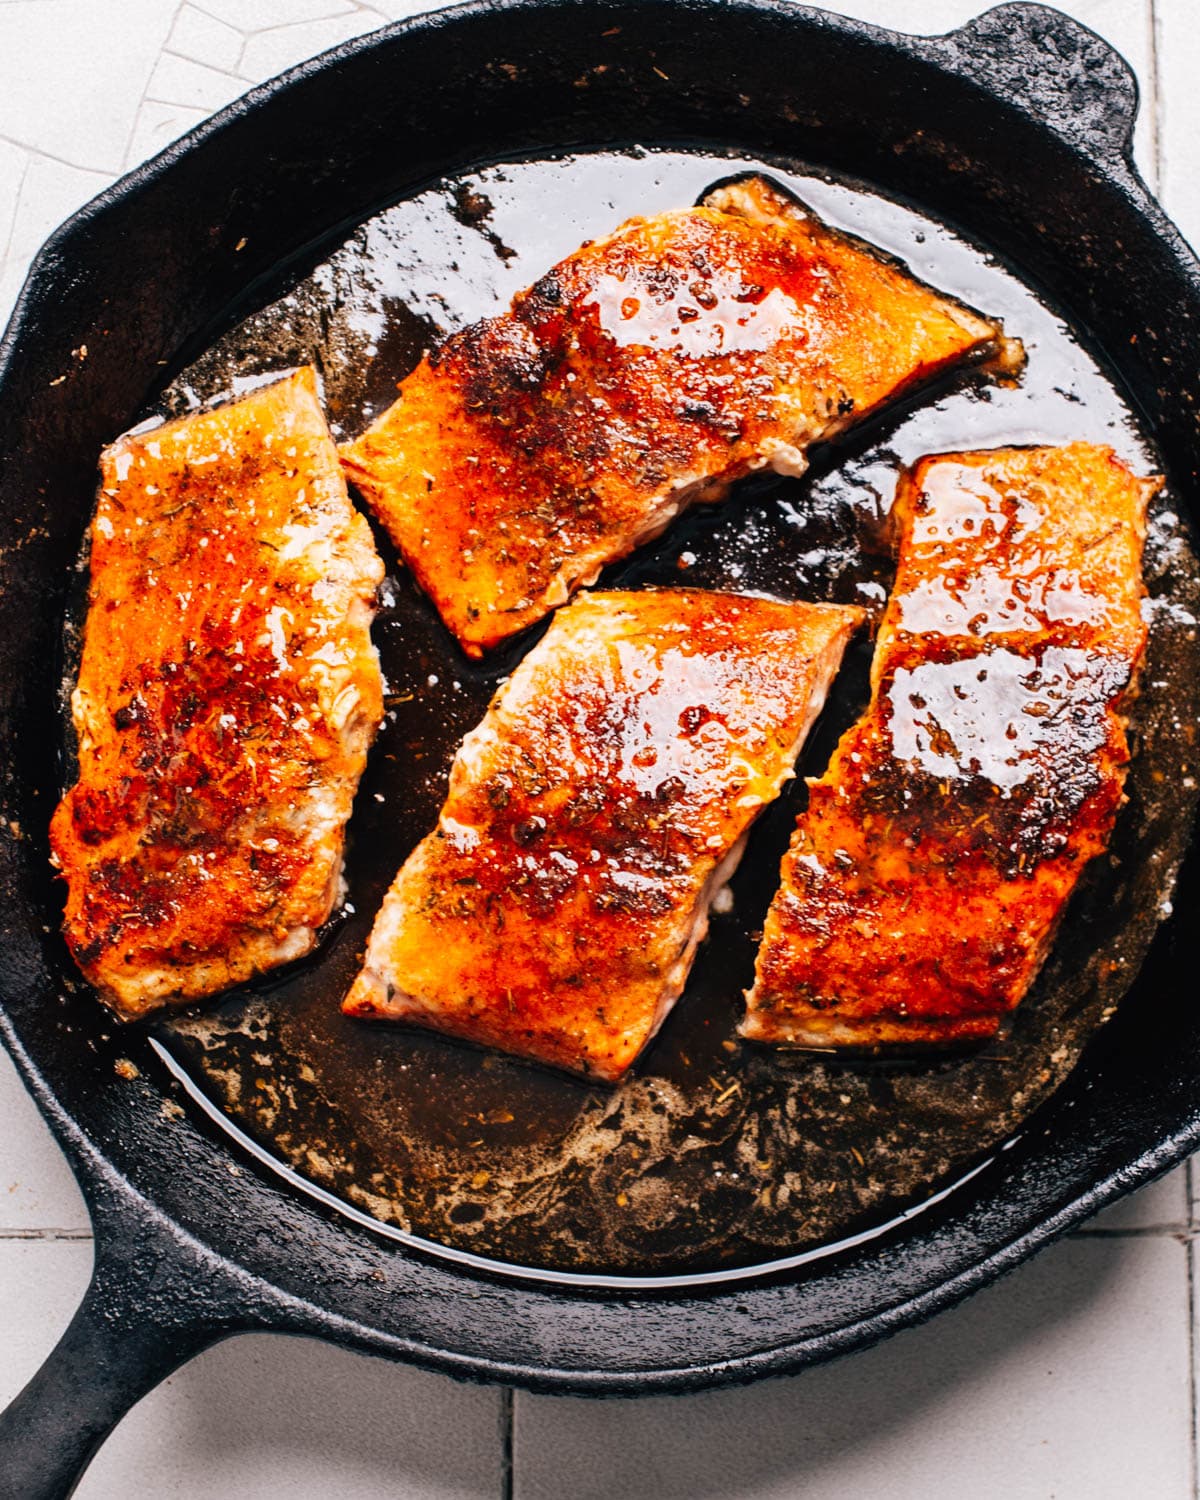 A cast iron skillet contains 4 salmon fillets that have been seasoned with Cajun spices and brushed with honey butter.